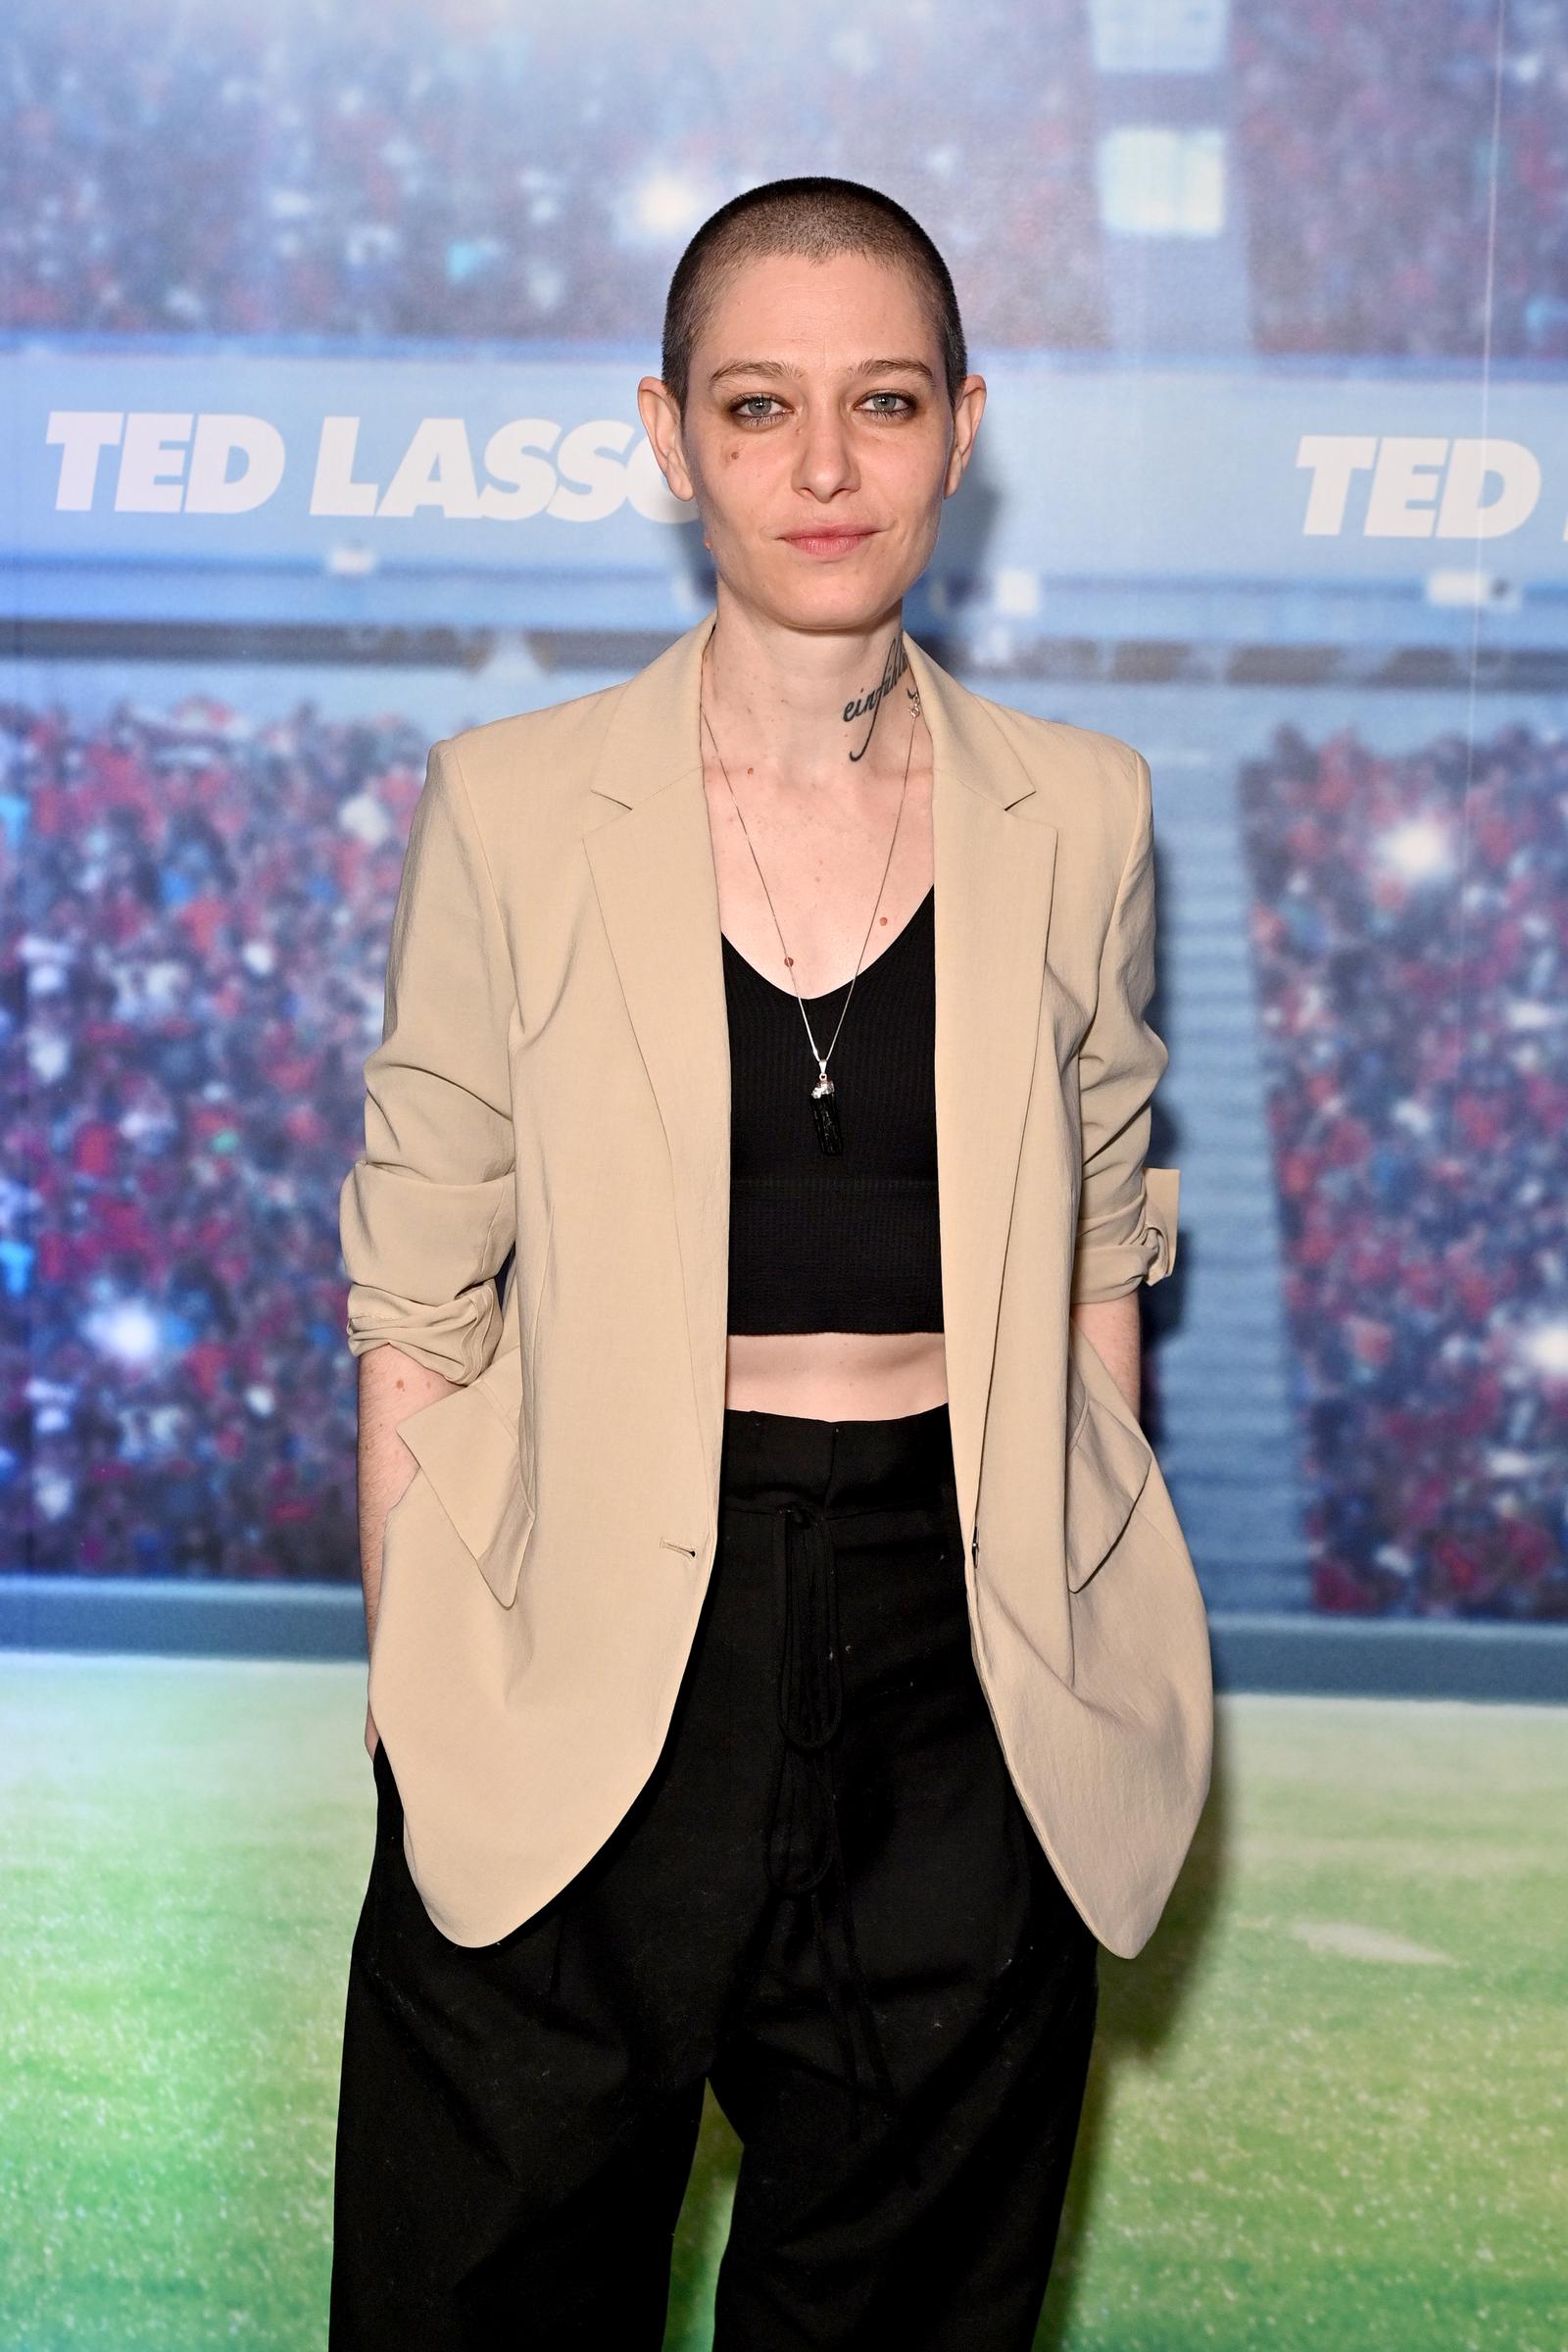 Asia Kate Dillon at the Variety and Apple TV+ season 3 screening of "Ted Lasso" on March 15, 2023, in New York City. | Source: Getty Images